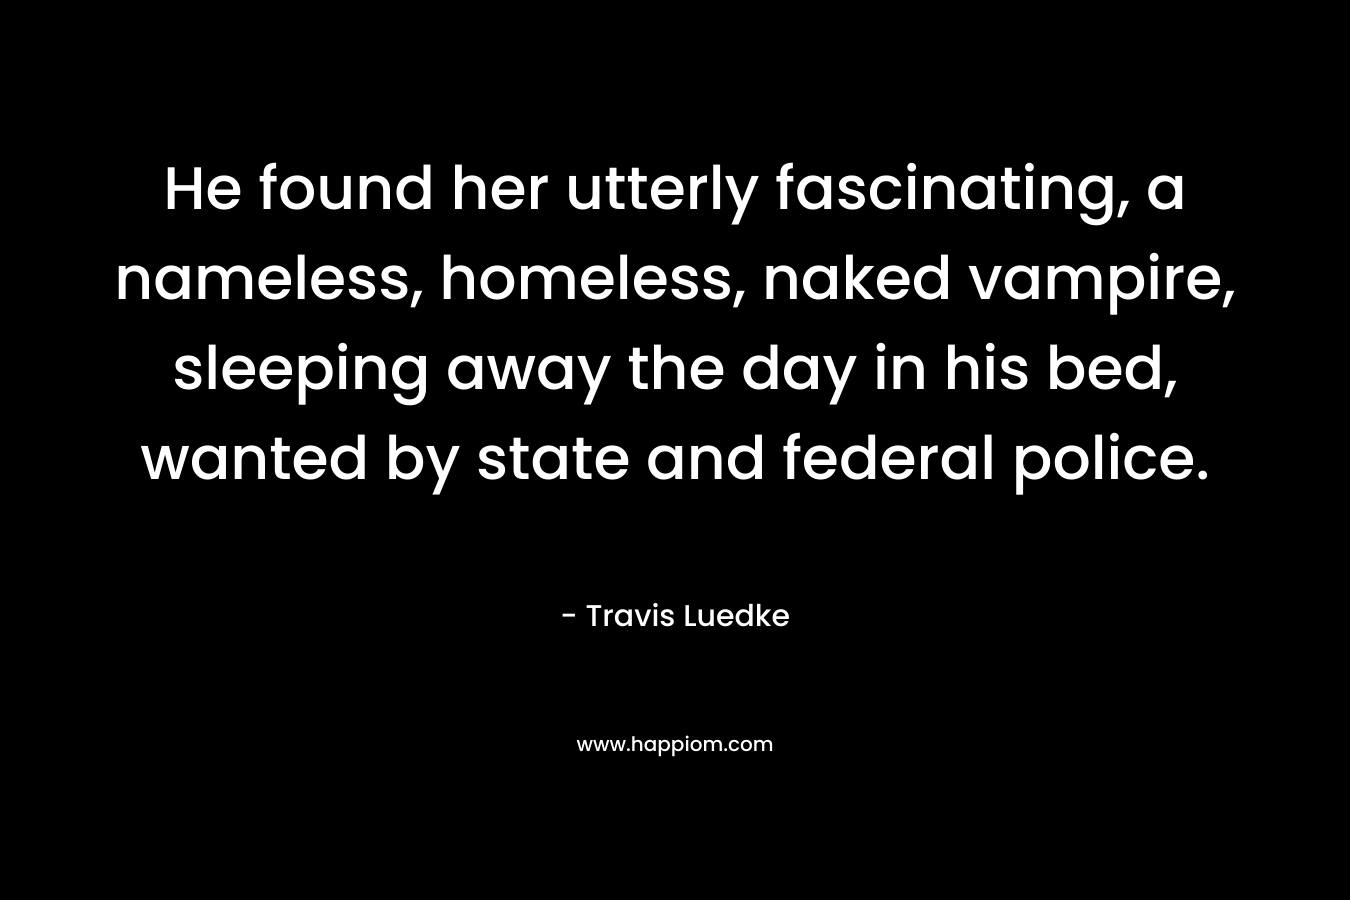 He found her utterly fascinating, a nameless, homeless, naked vampire, sleeping away the day in his bed, wanted by state and federal police. – Travis Luedke